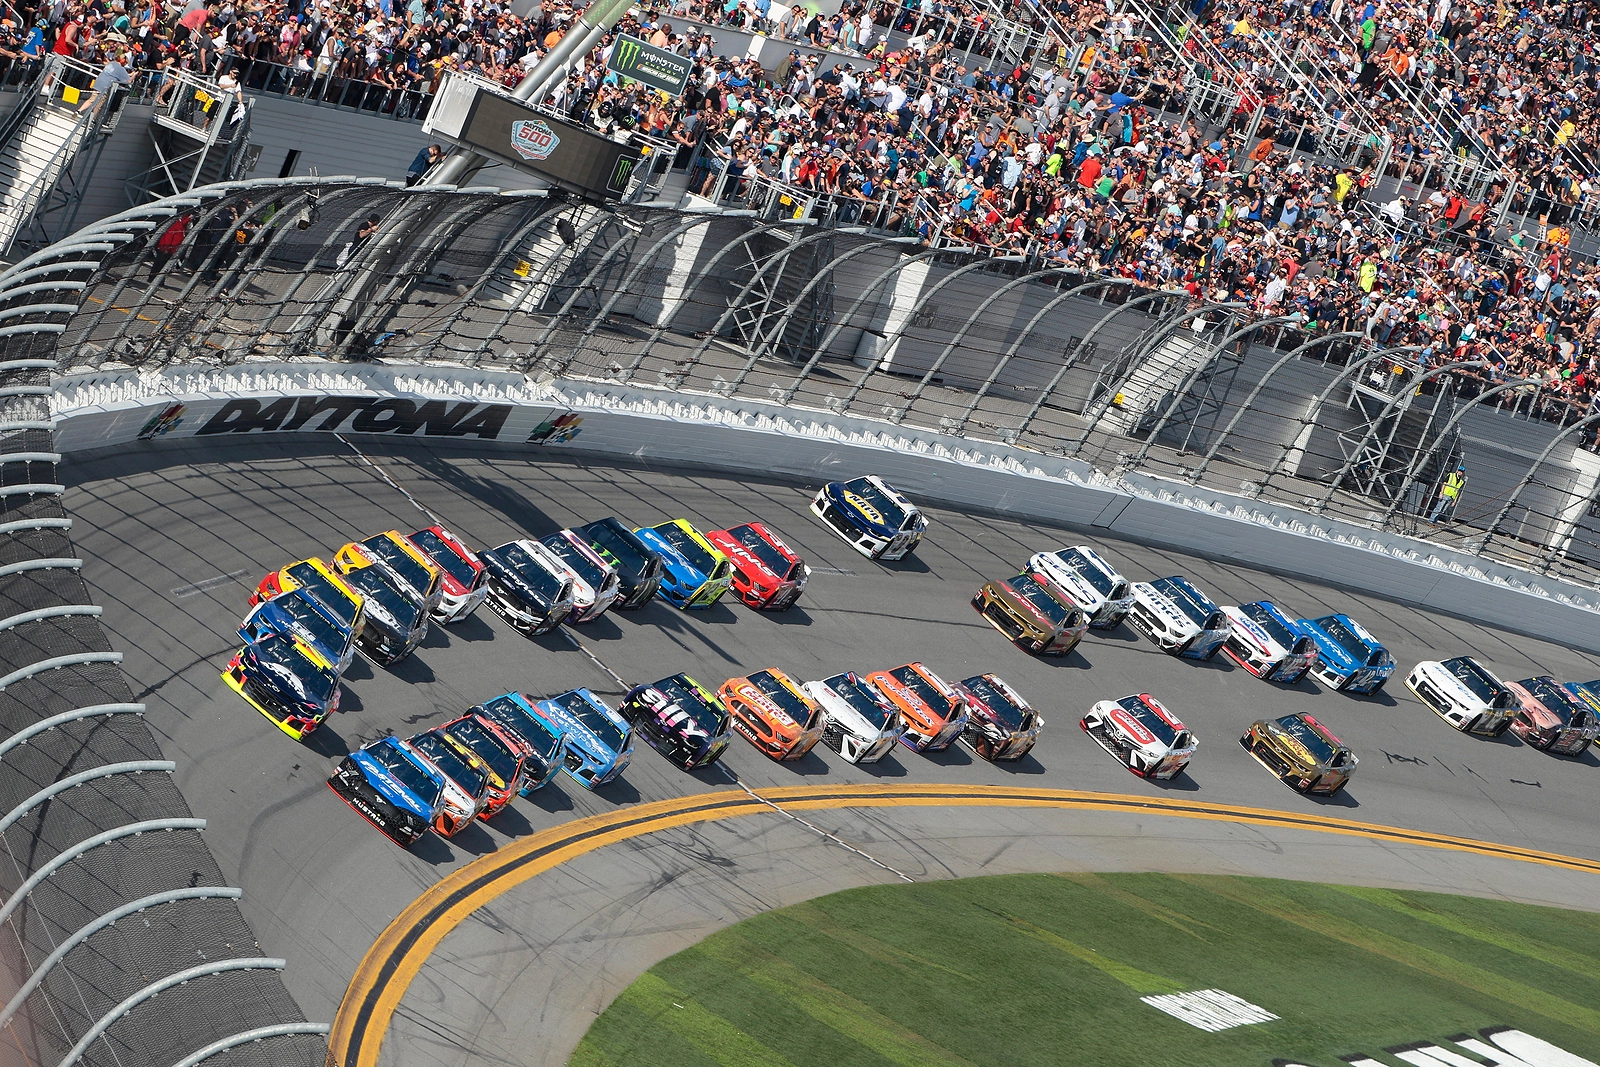 Book your February 2019 NASCAR RV Rental NOW